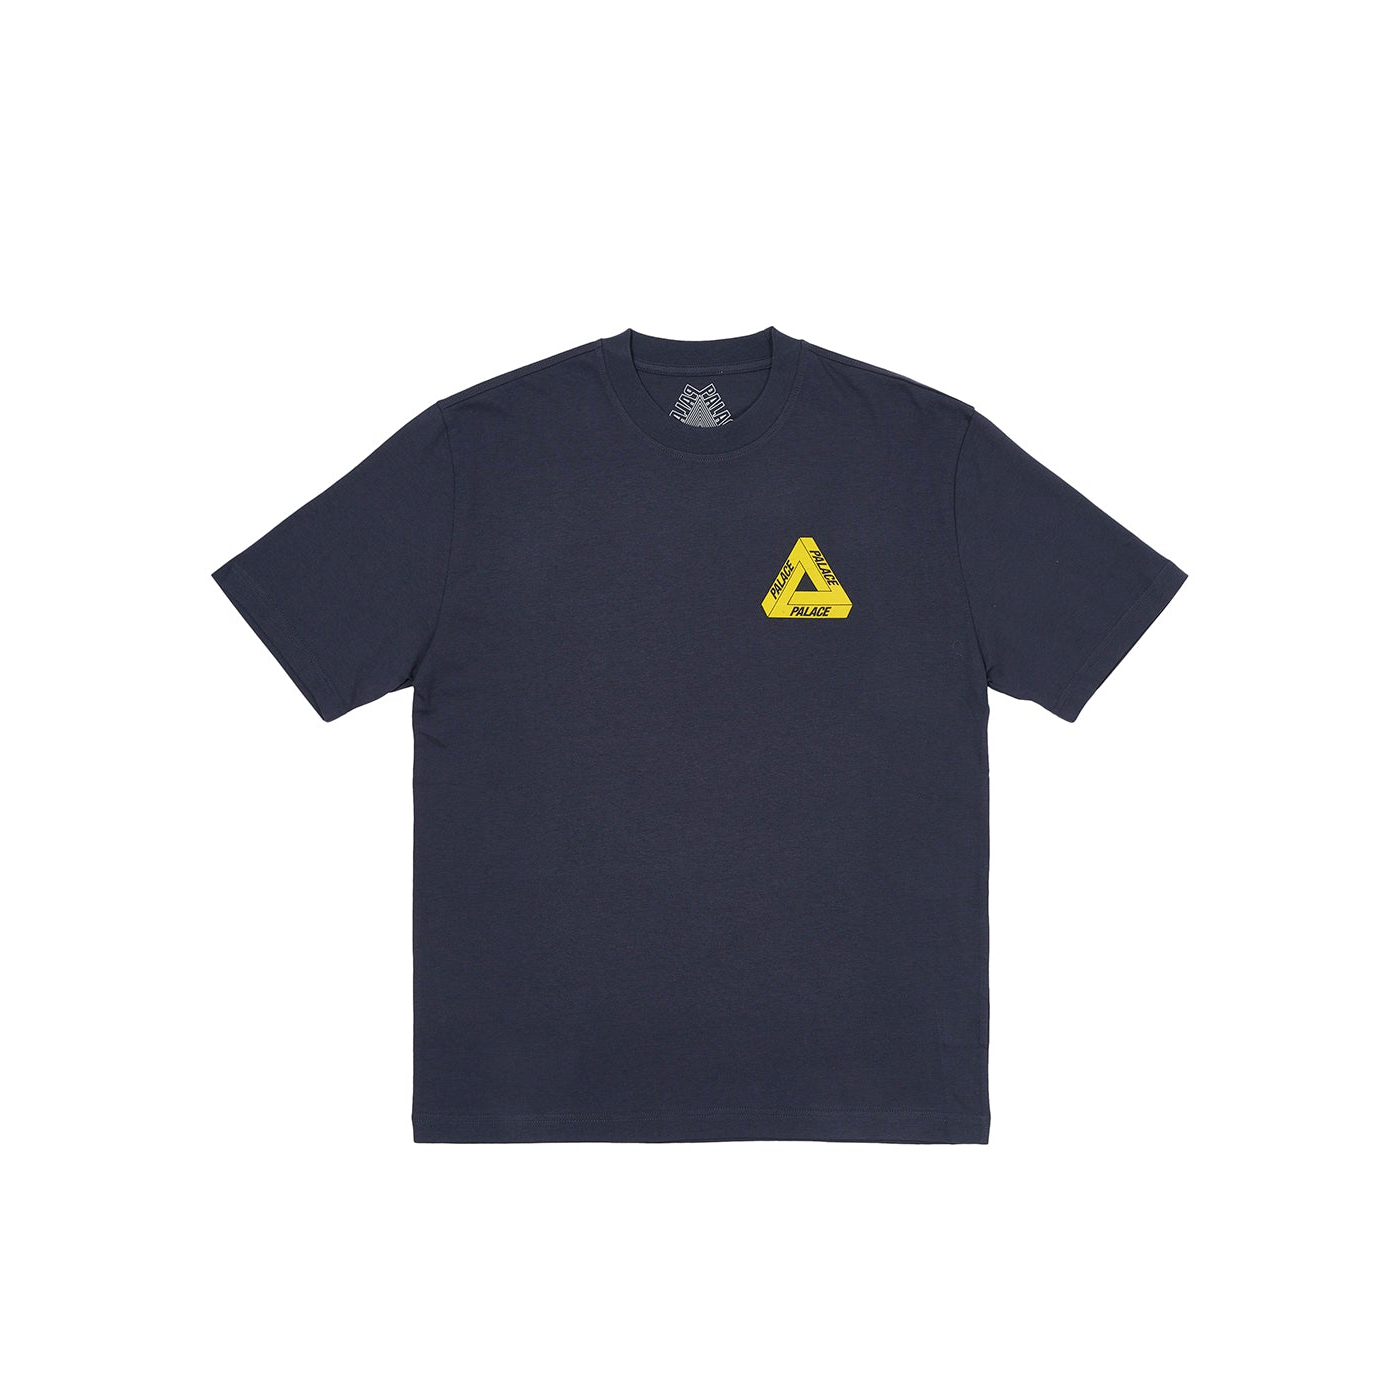 Thumbnail TRI-TWISTER T-SHIRT NAVY one color